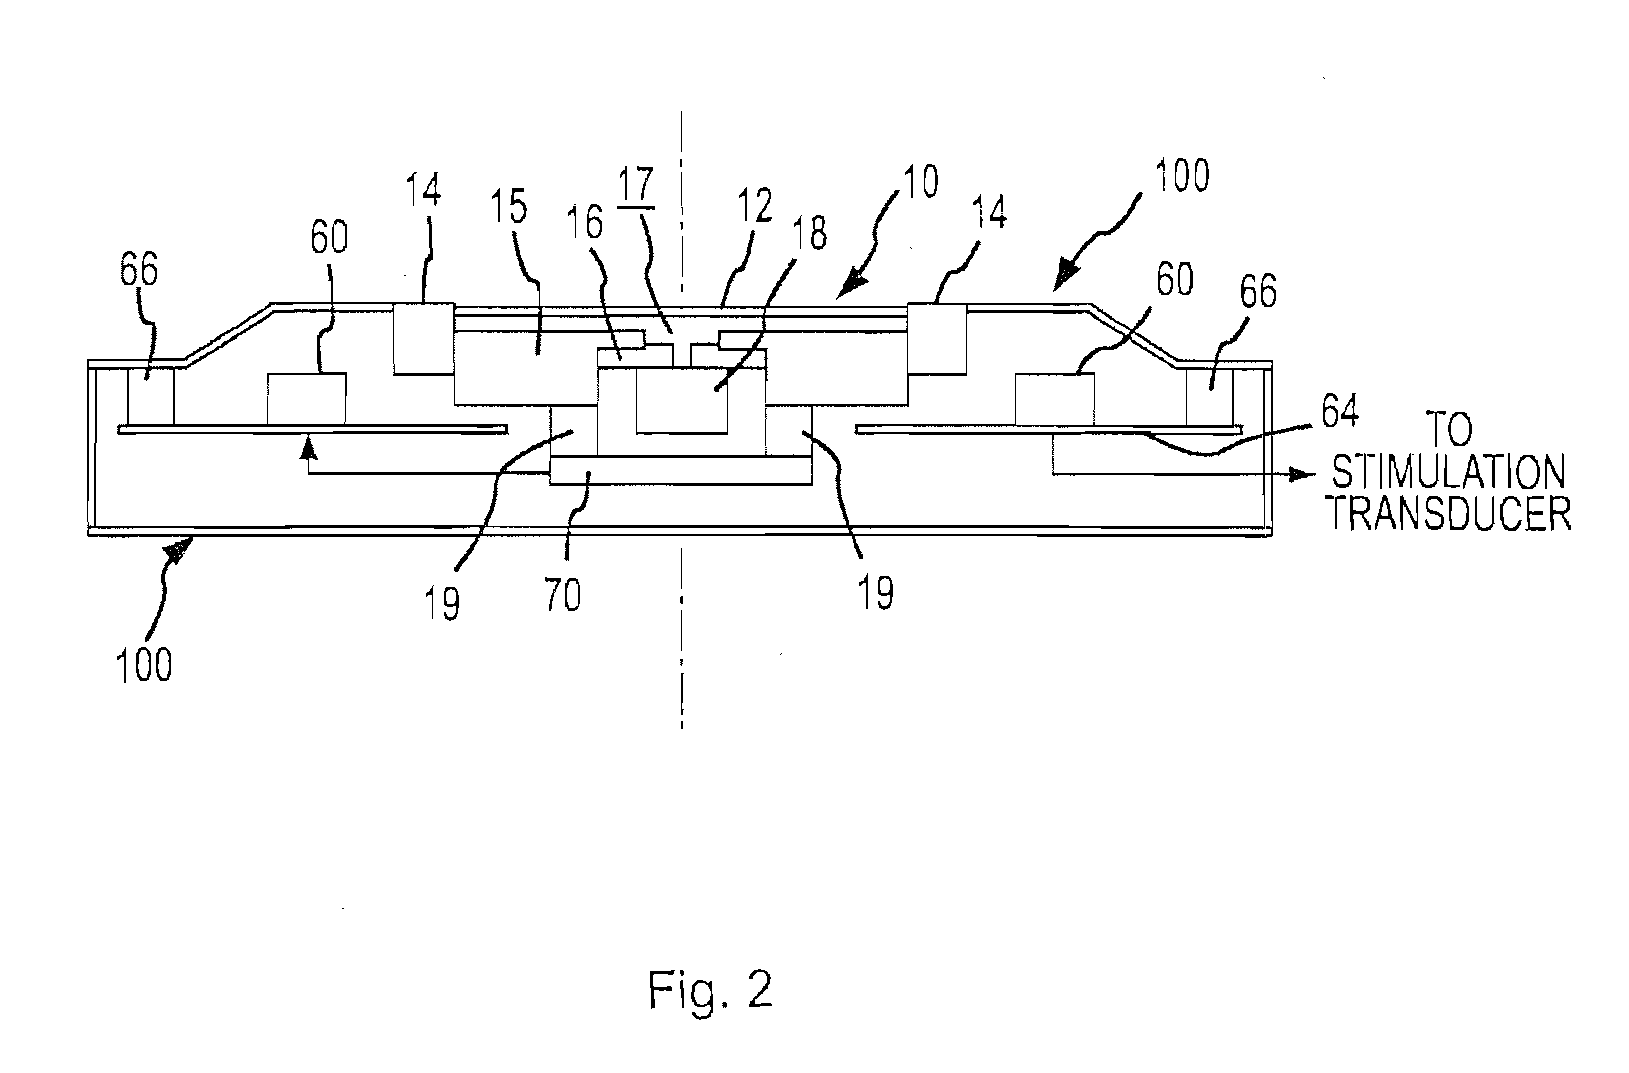 Adaptive cancellation system for implantable hearing instruments